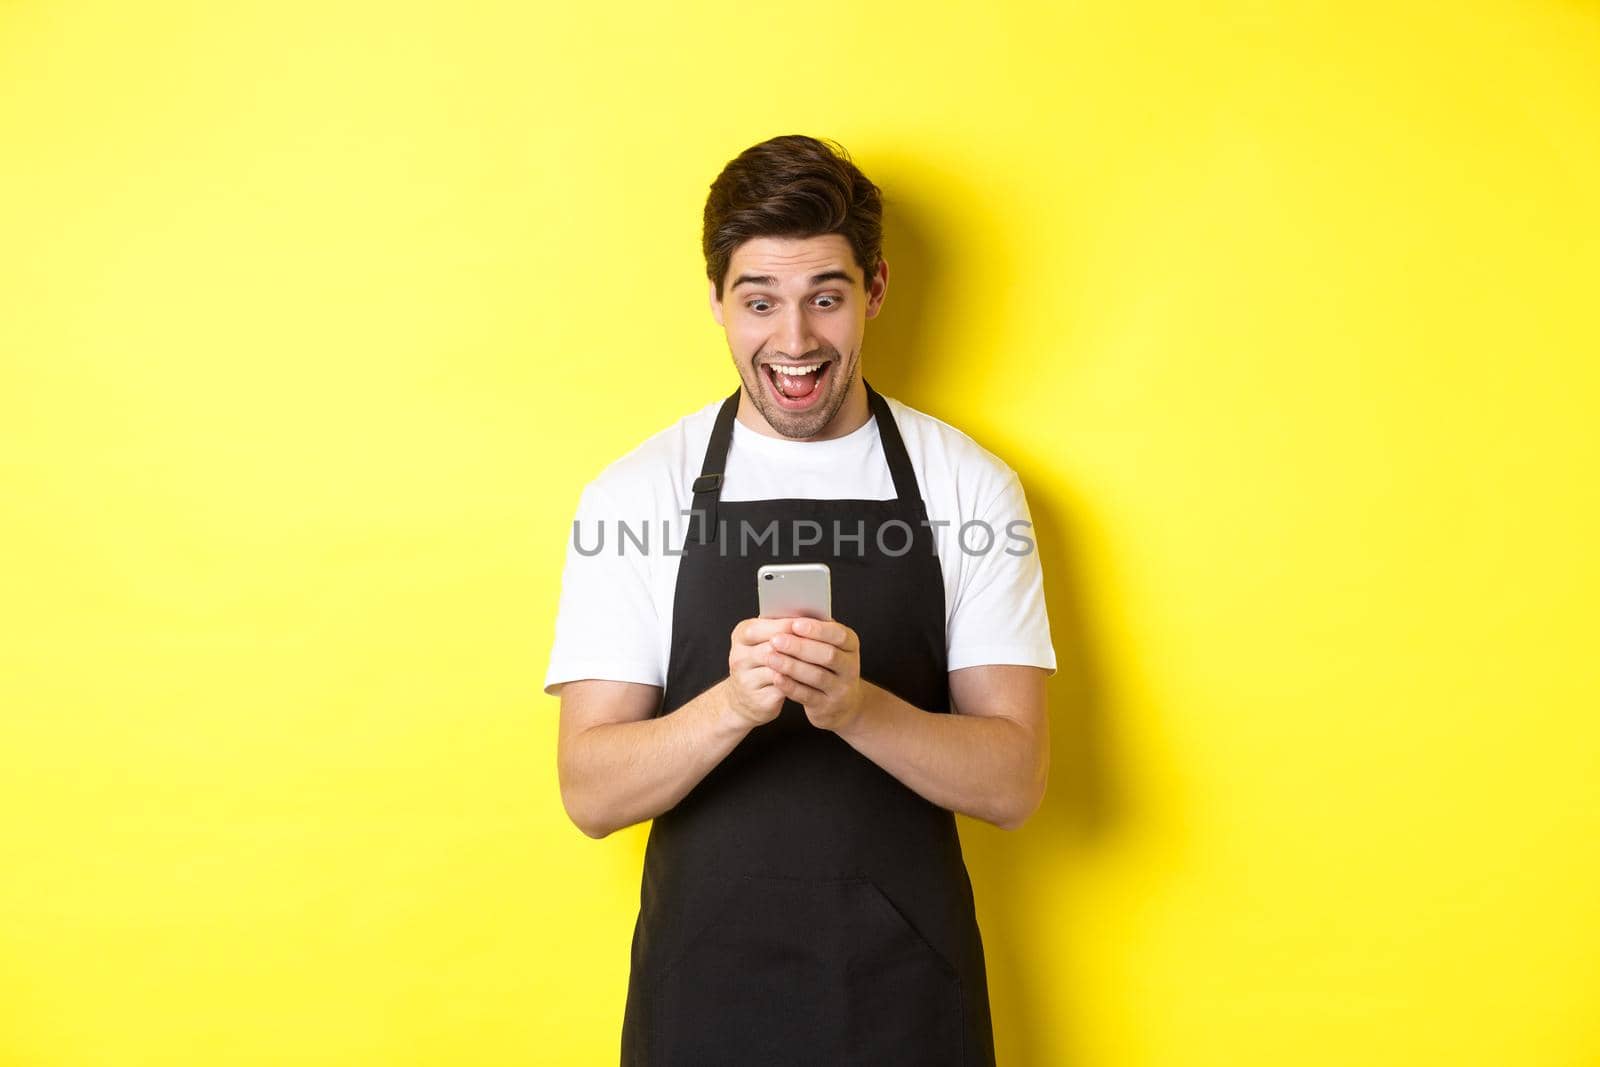 Barista looking surprised as reading message on mobile phone, standing in black apron against yellow background.